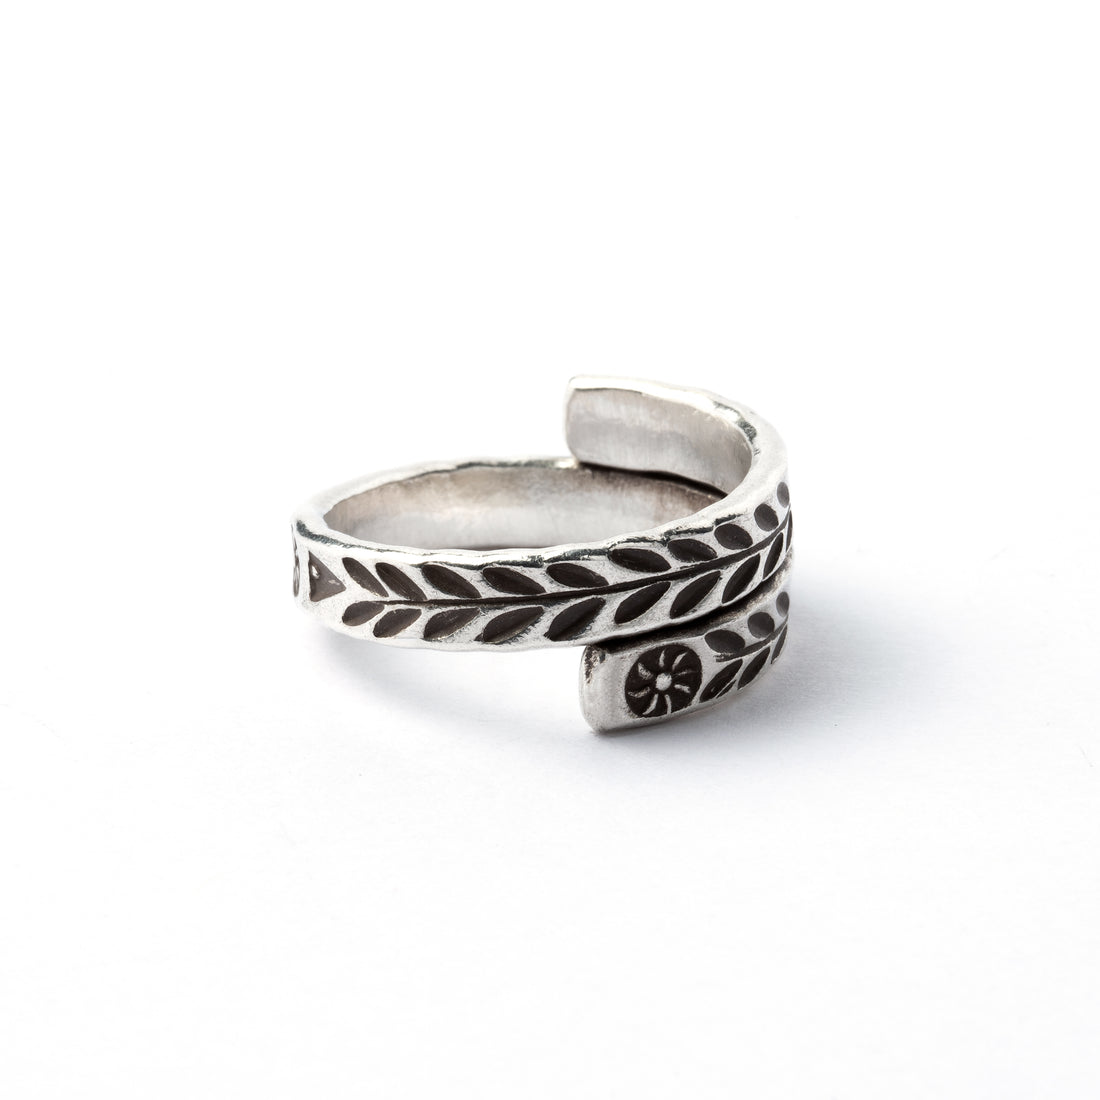 Solstice Tribal Silver Ring right side view